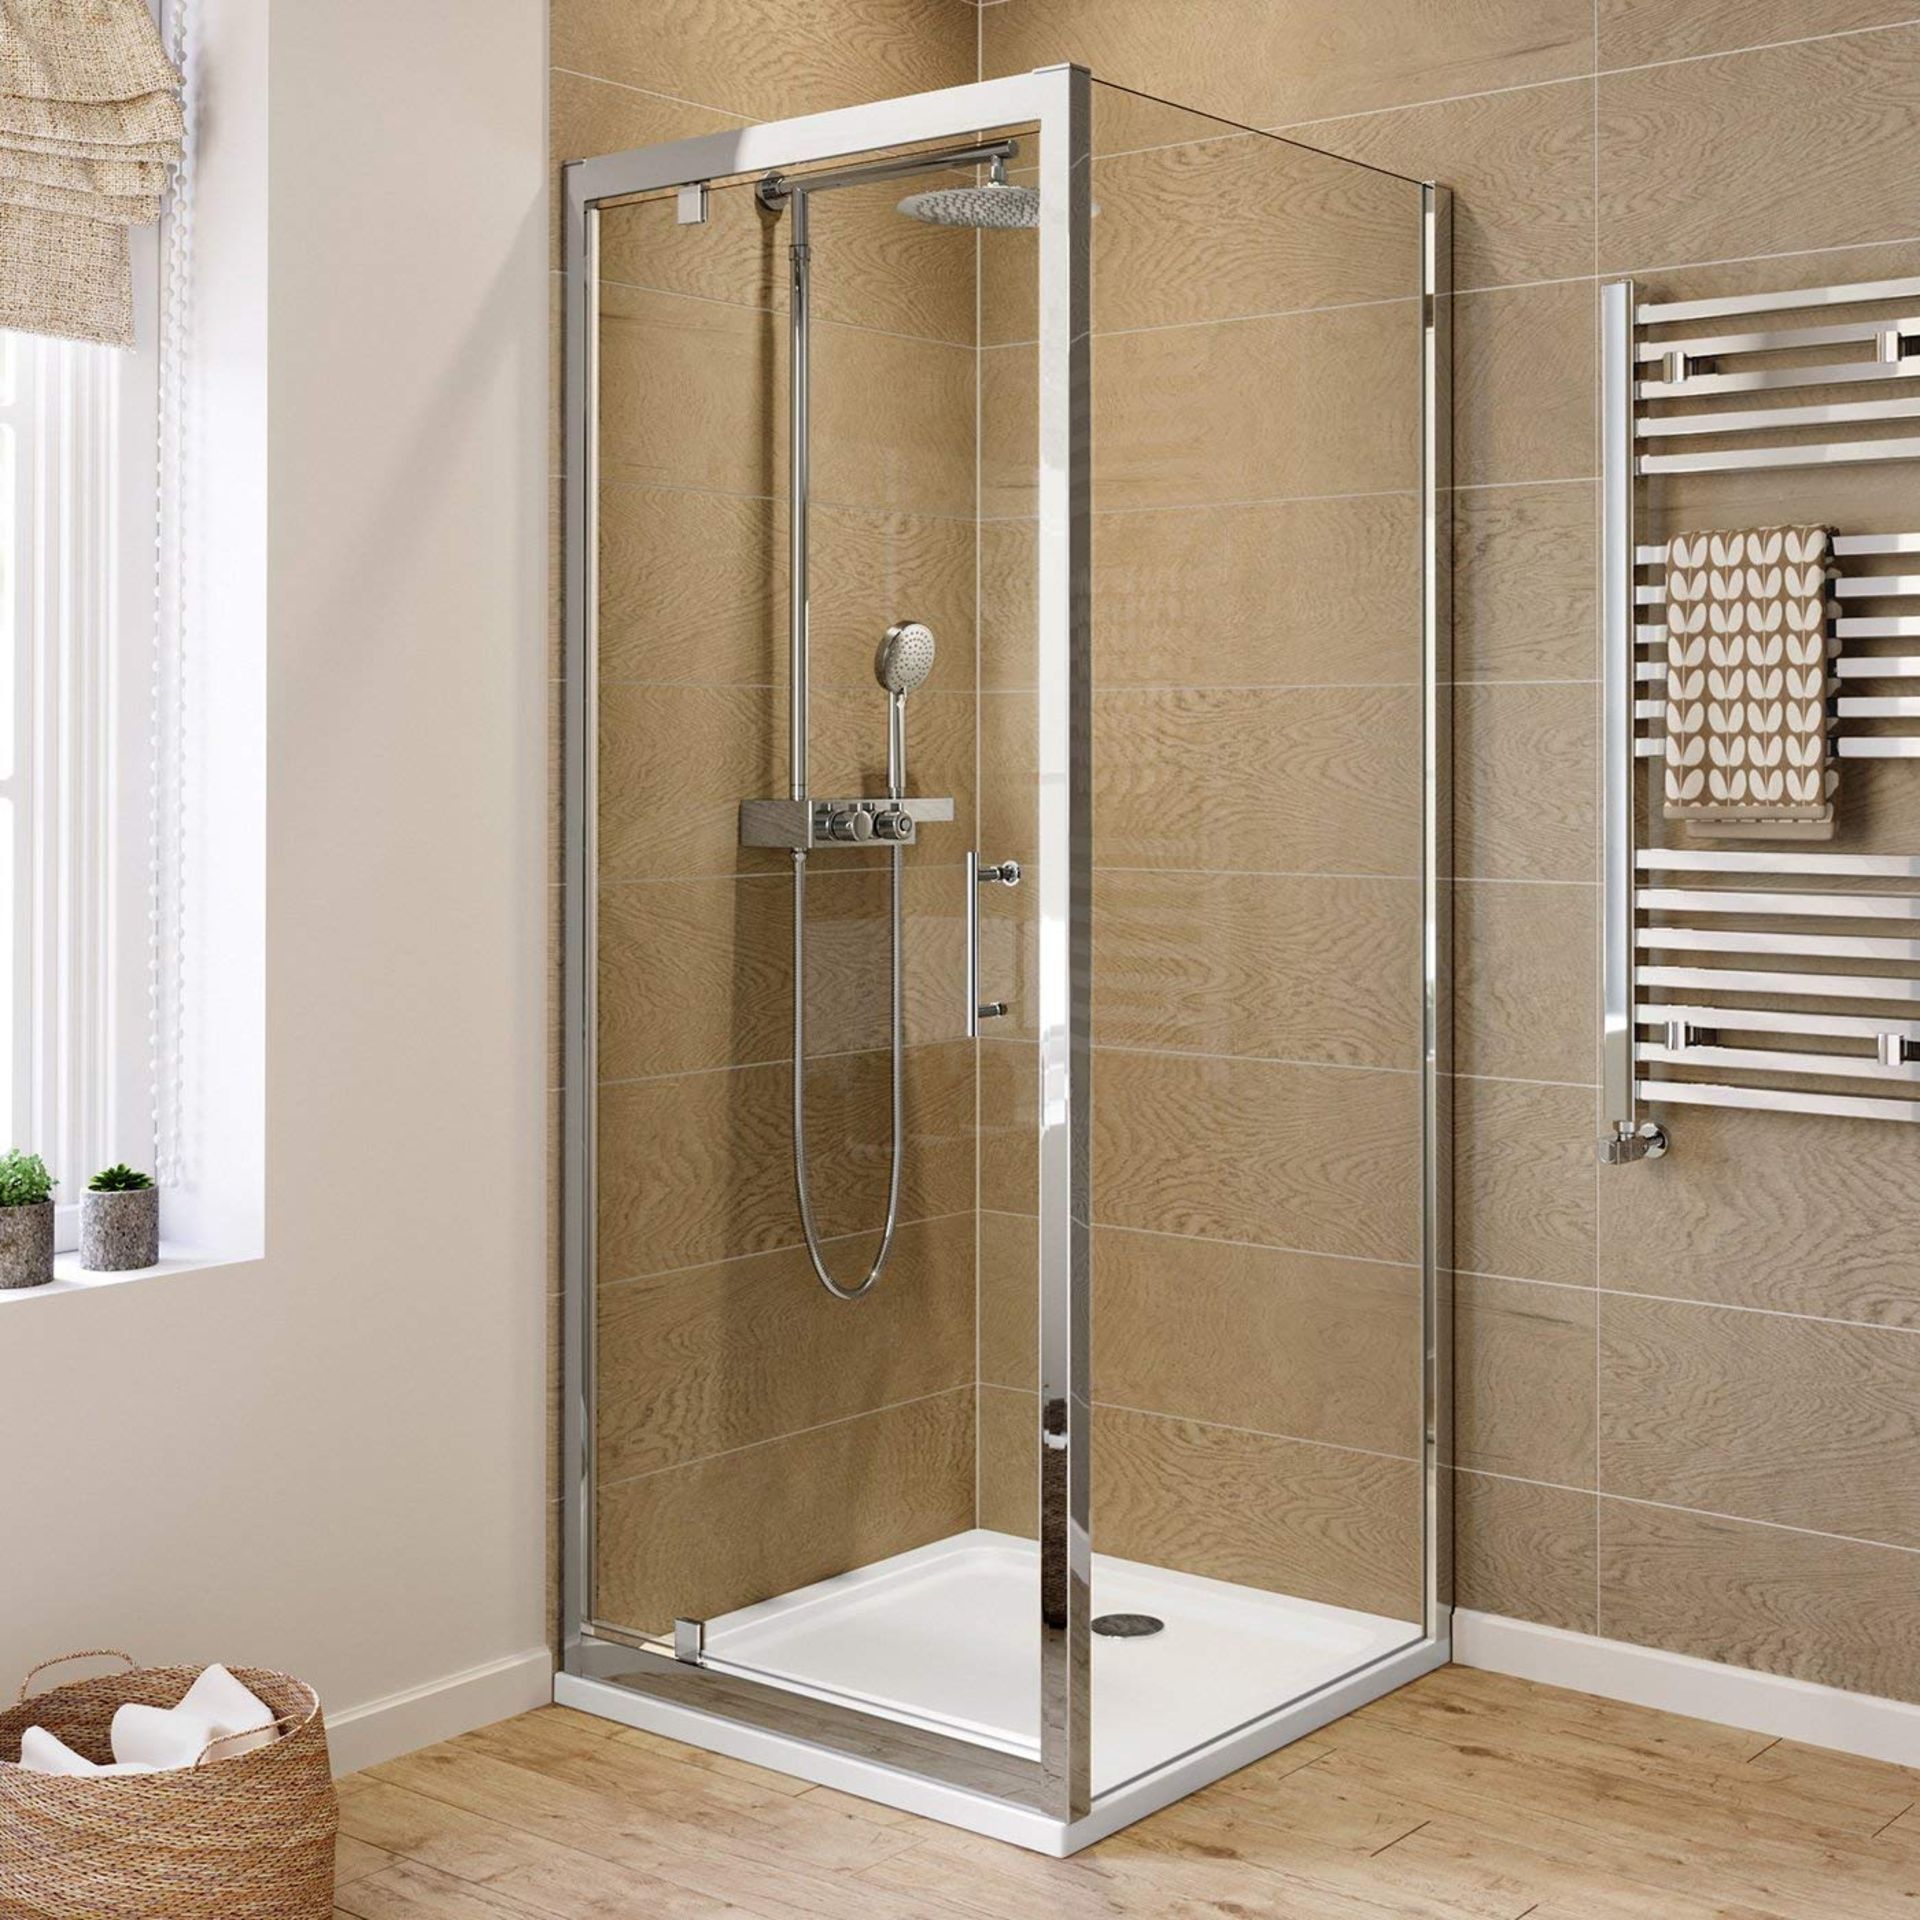 Twyfords 900x900 Pivot Hinged 8mm Glass Shower Enclosure Reversible Door + Side Panel.RRP £349...